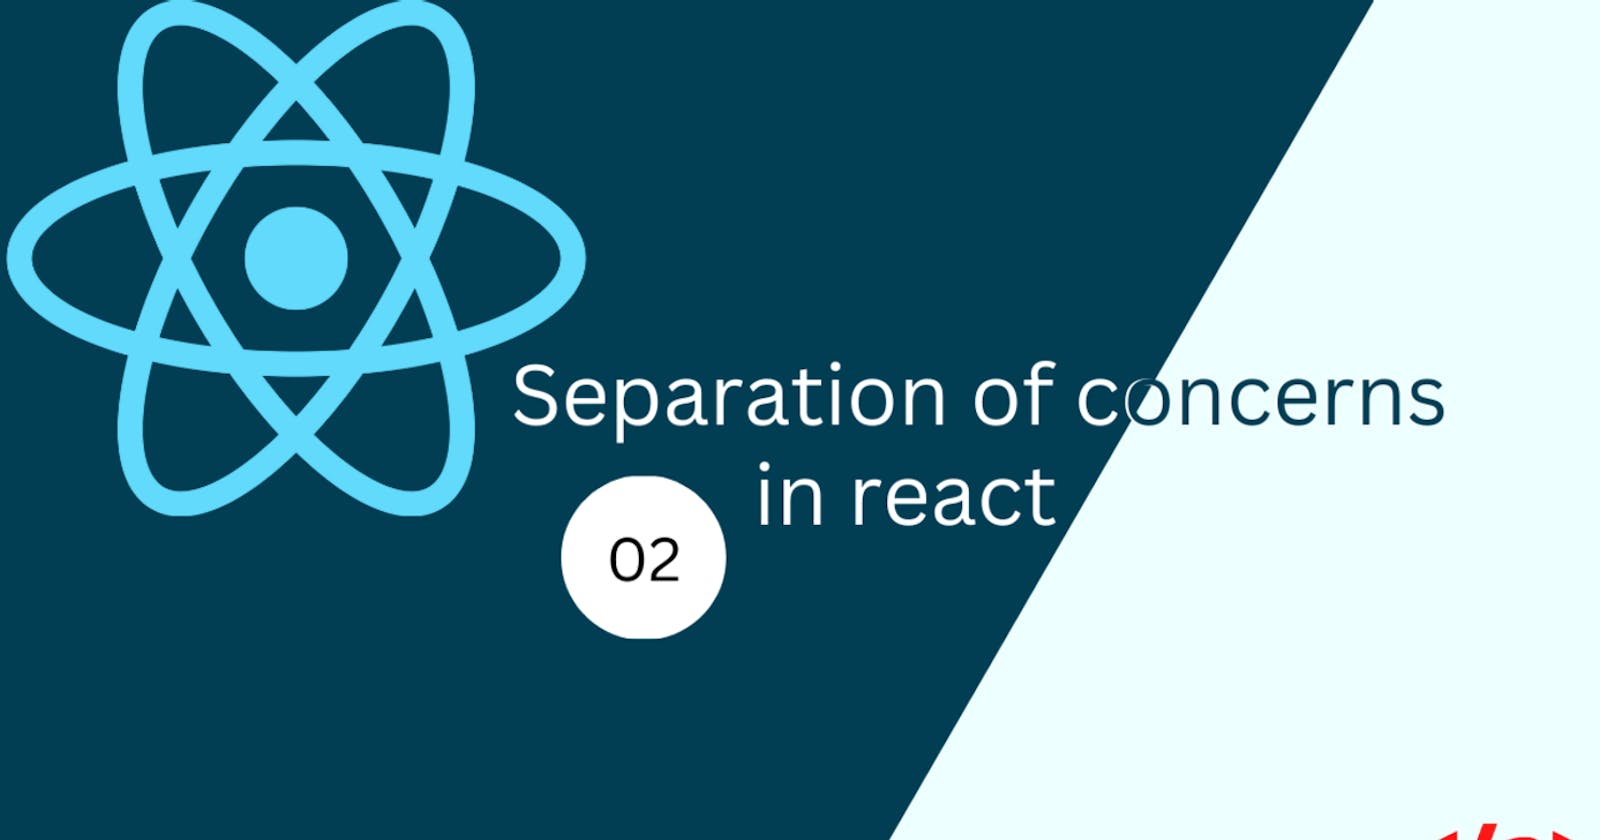 Separations of concerns in react